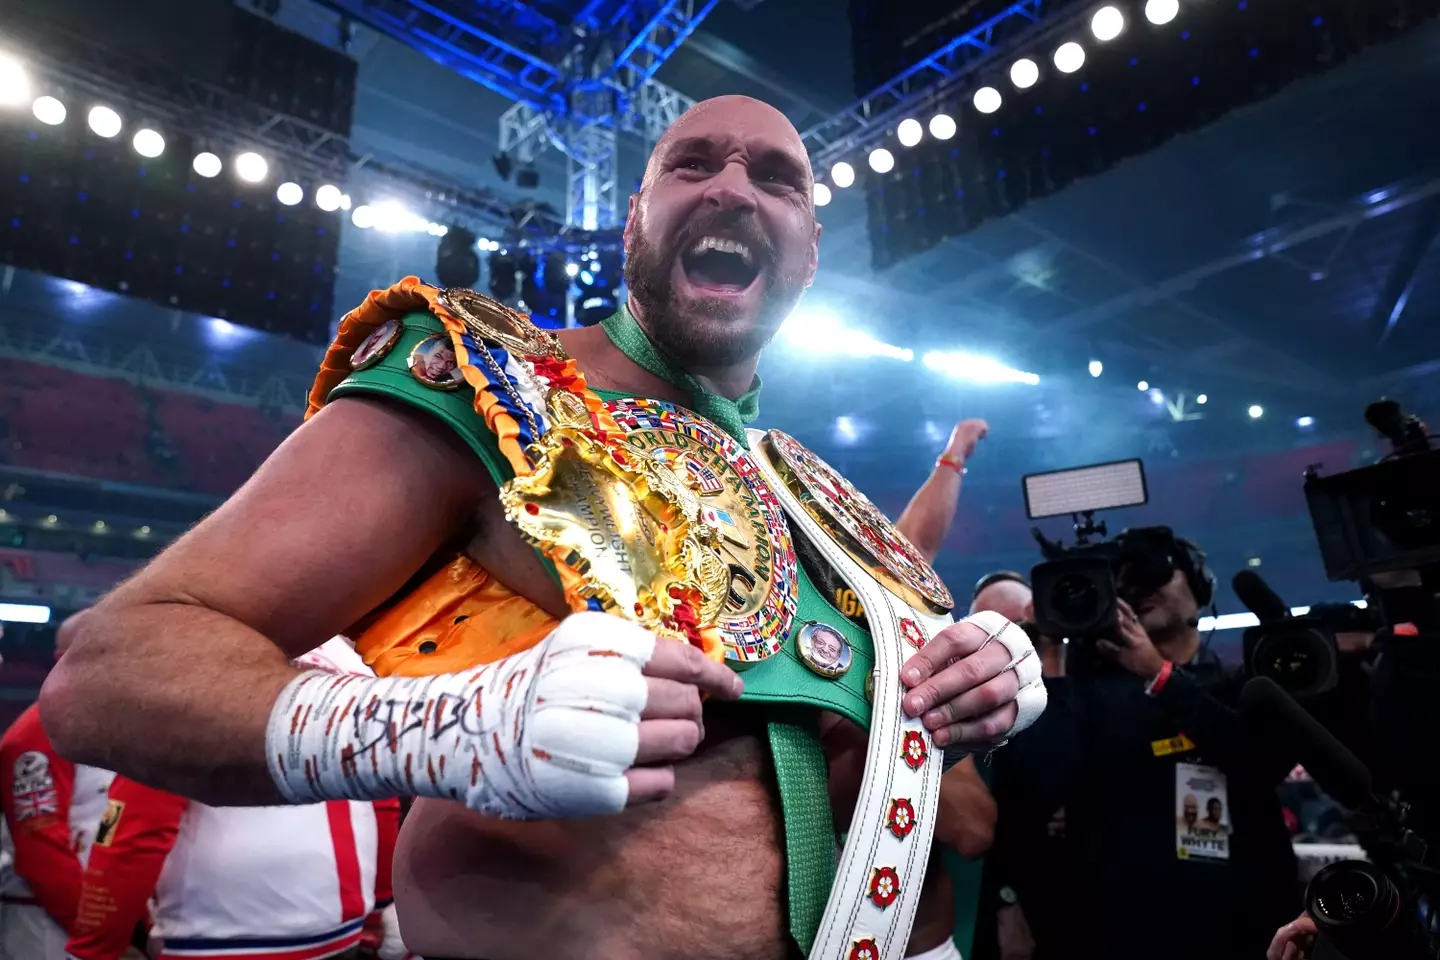 Fury pictured following his win over Dillian Whyte in April. (Image